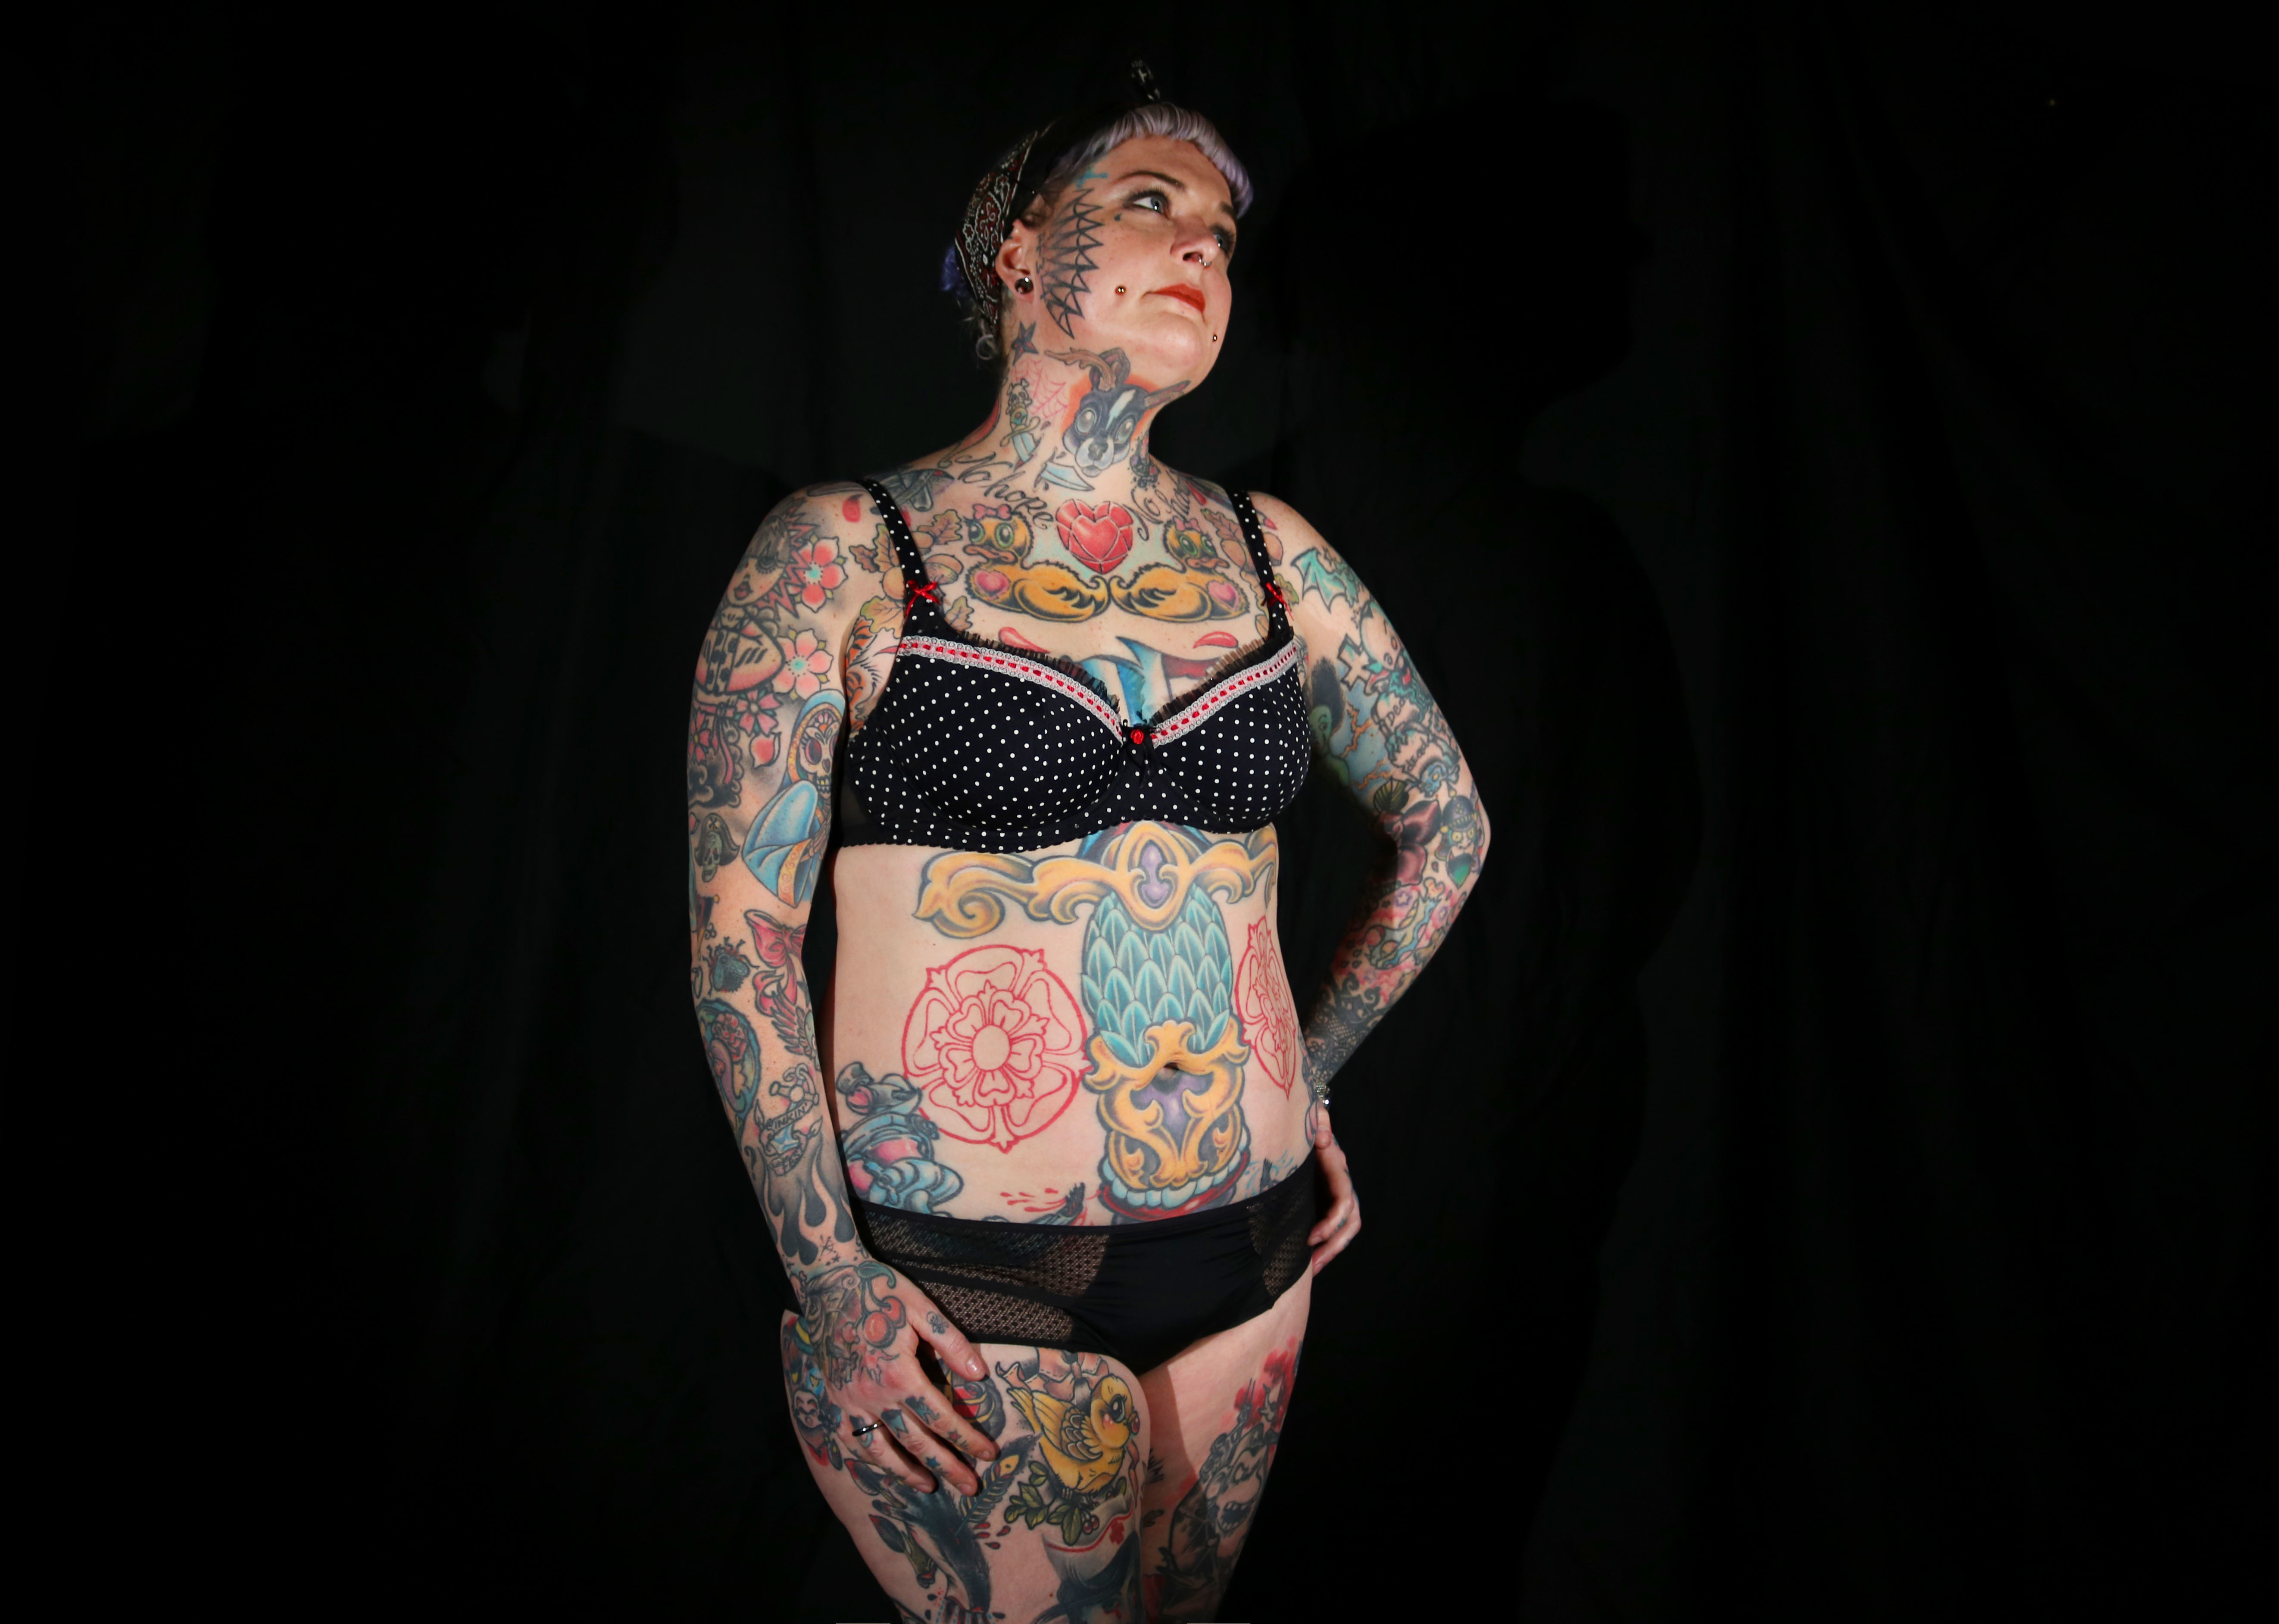 Elisa Snippop, a spoonful of sugar and a lot of tattoos - Tattoo Life